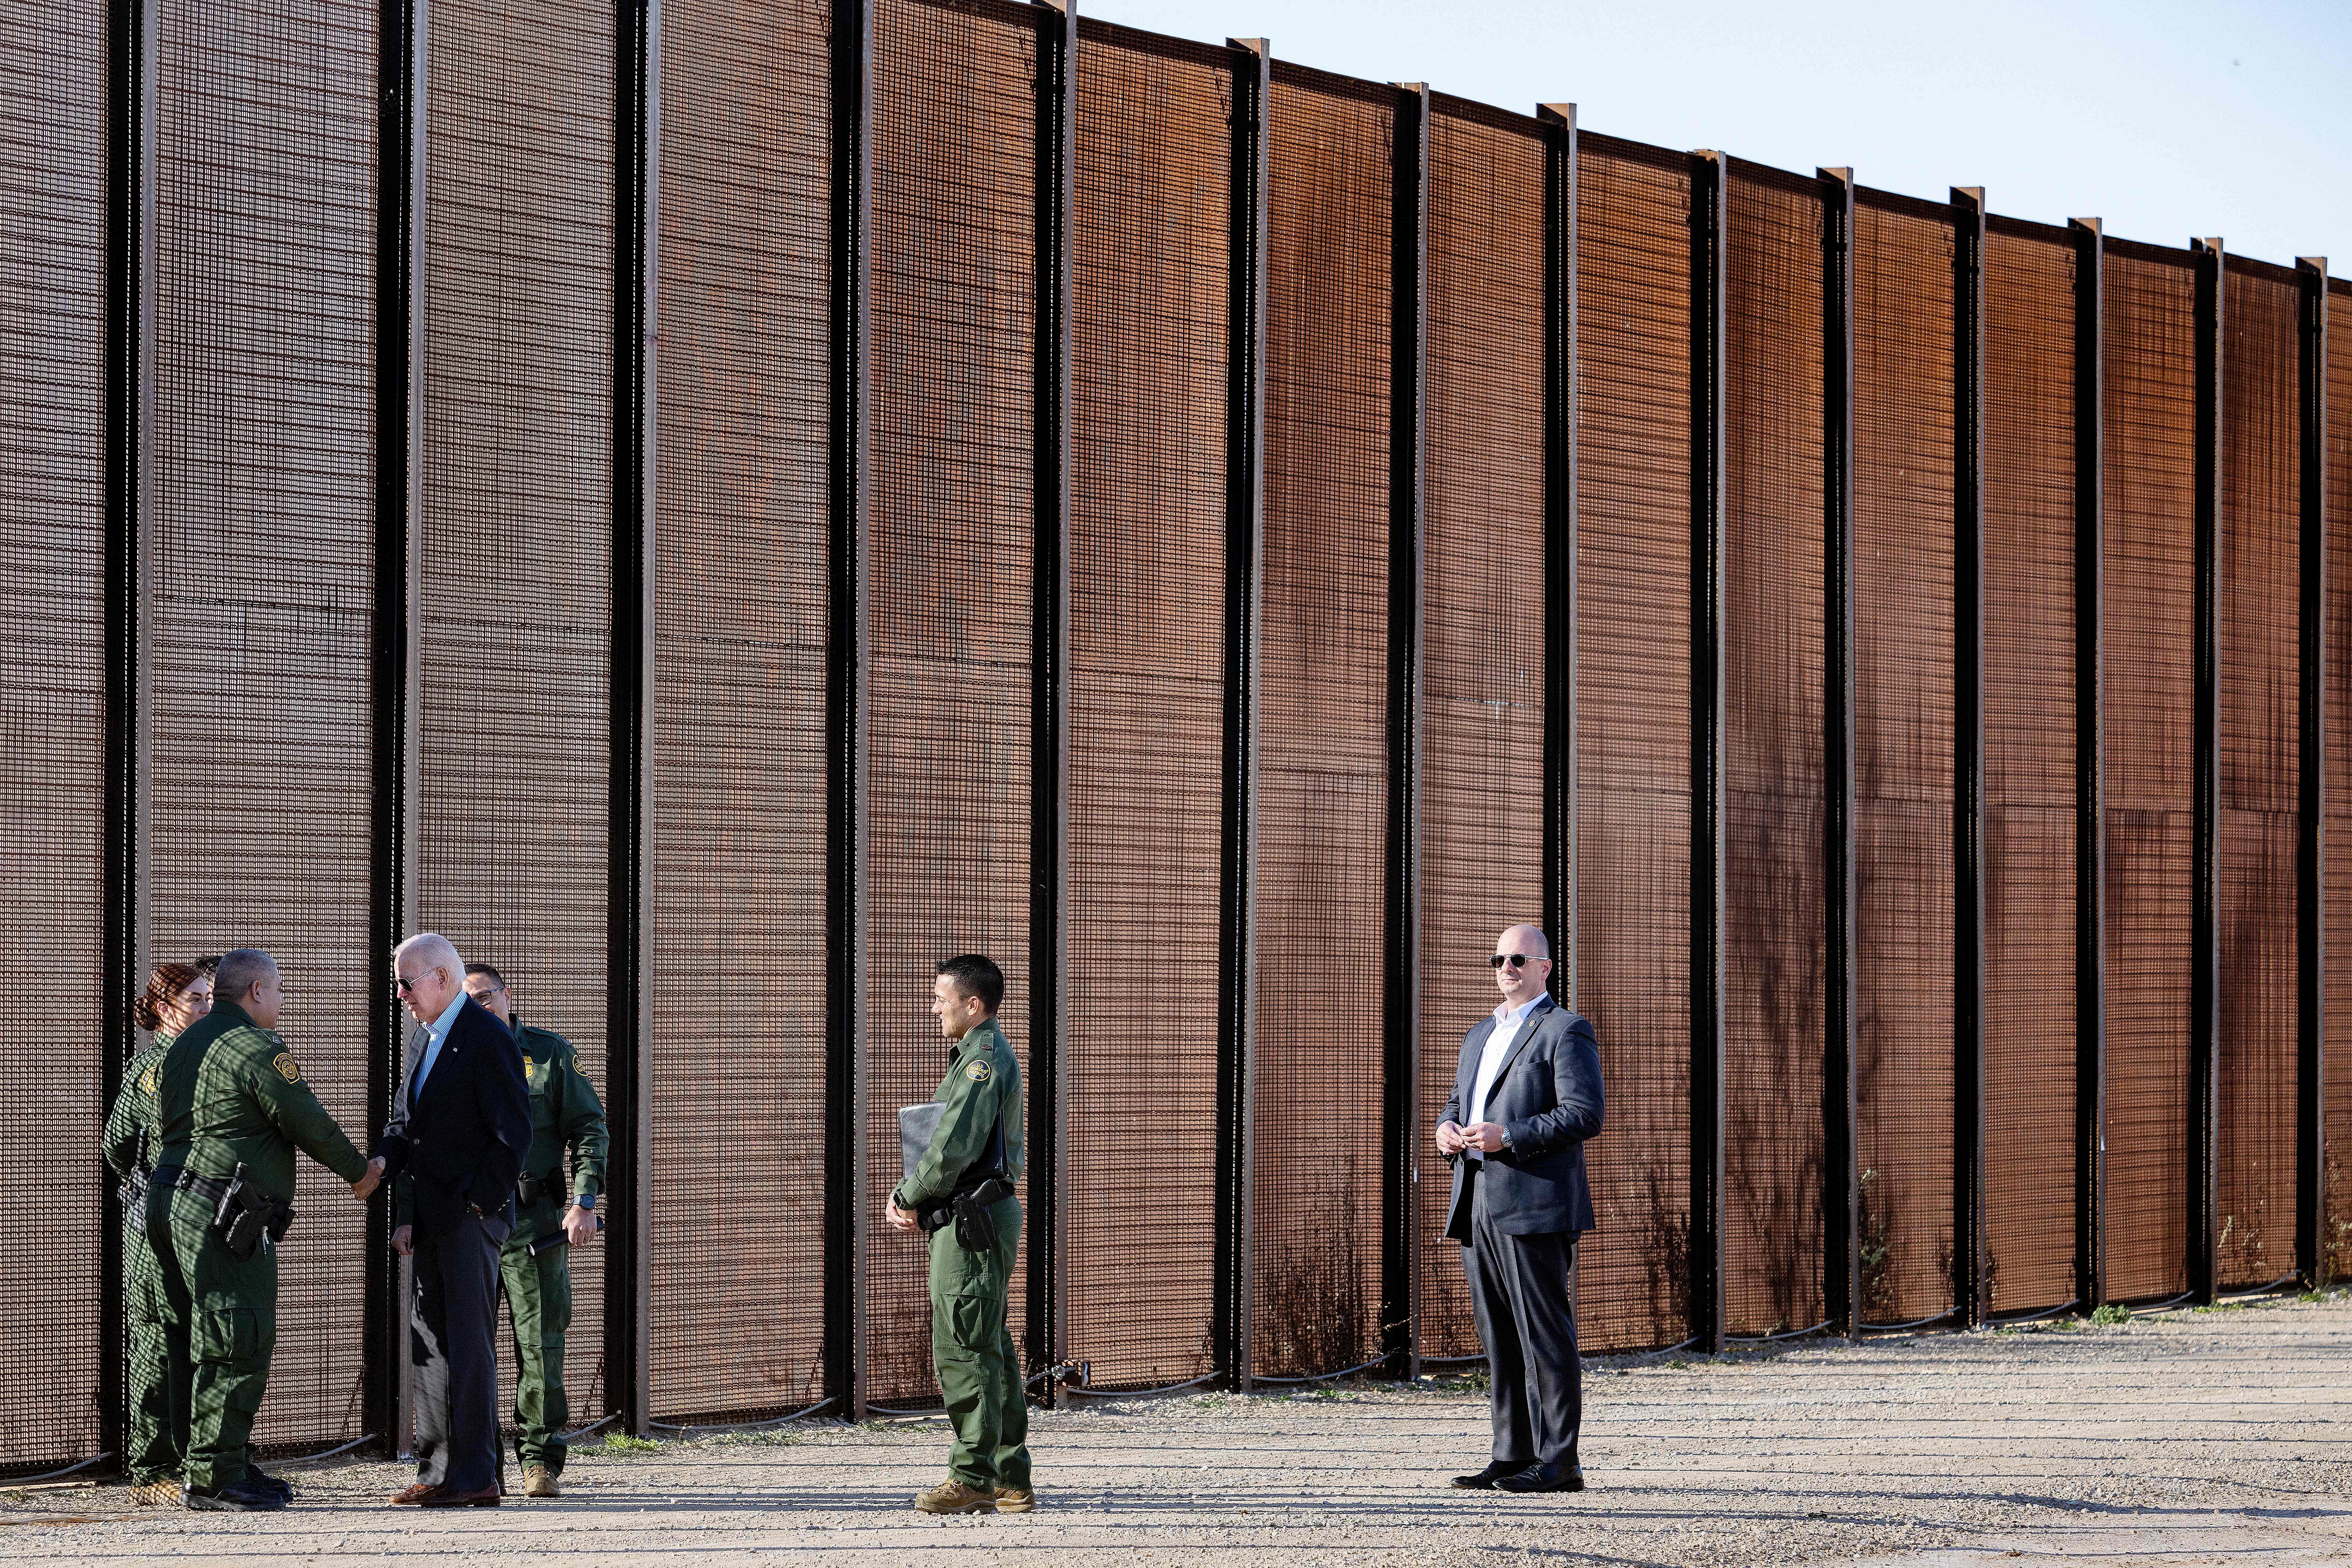 President Joe Biden stands and speaks with Customs and Border Protection officers at the US-Mexico border in El Paso, Texas.